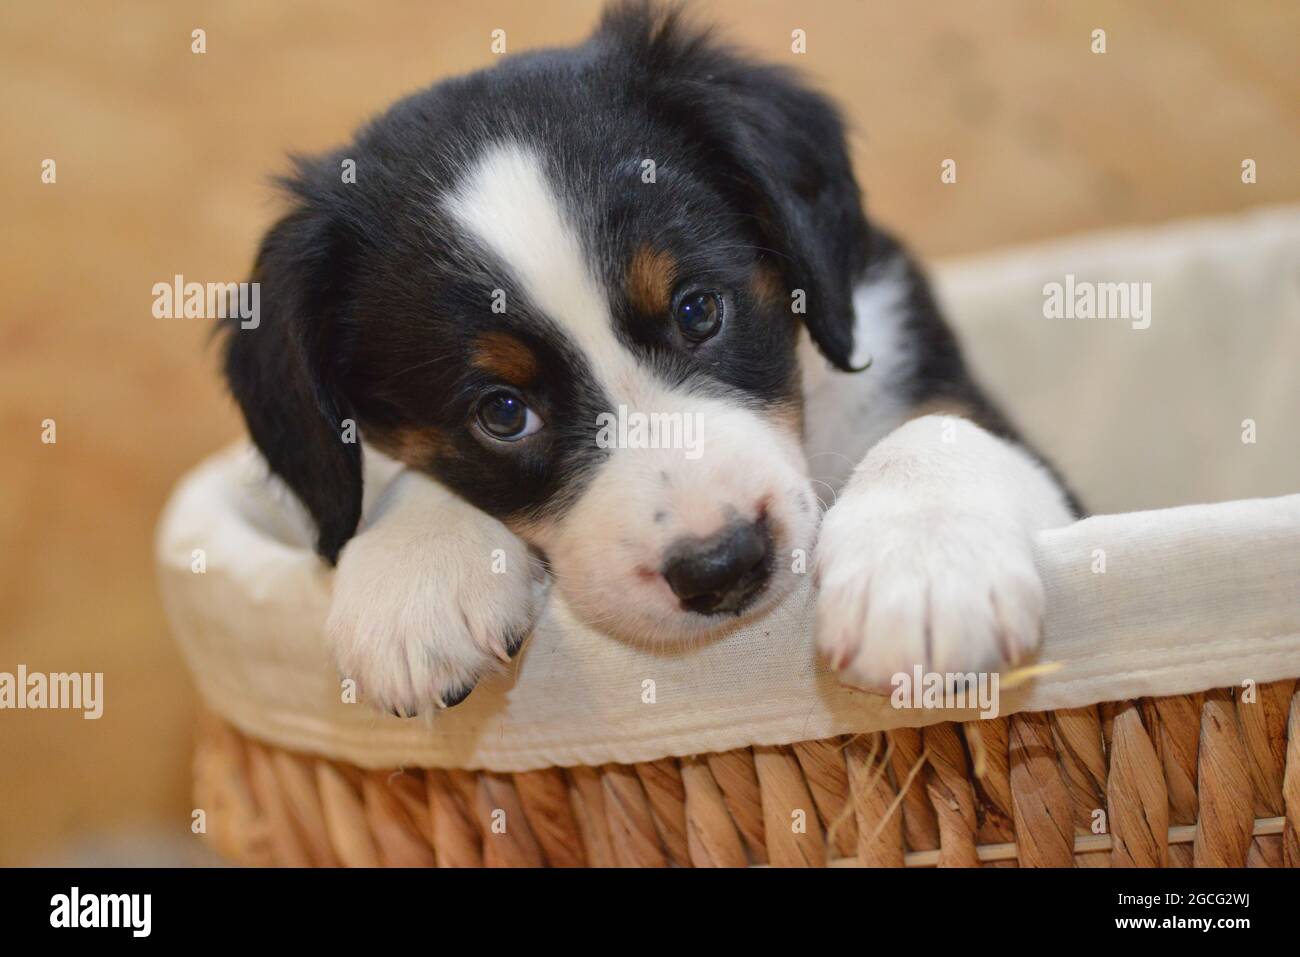 Bernese Mountain Dog looks curiously out of the basket Stock Photo